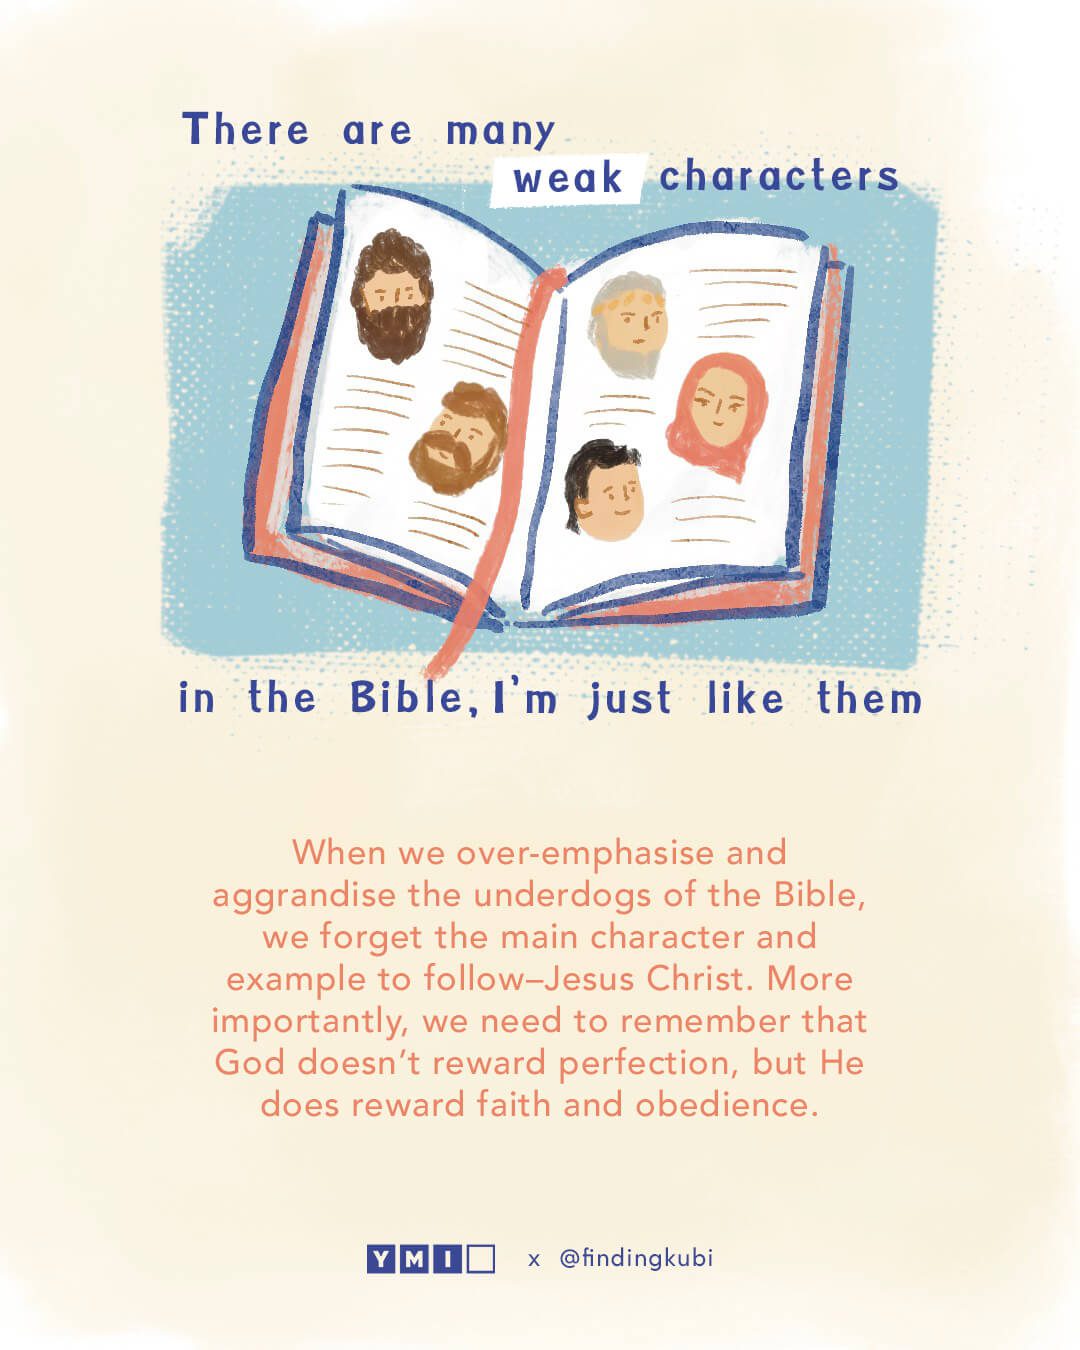 Illustration of bible characters